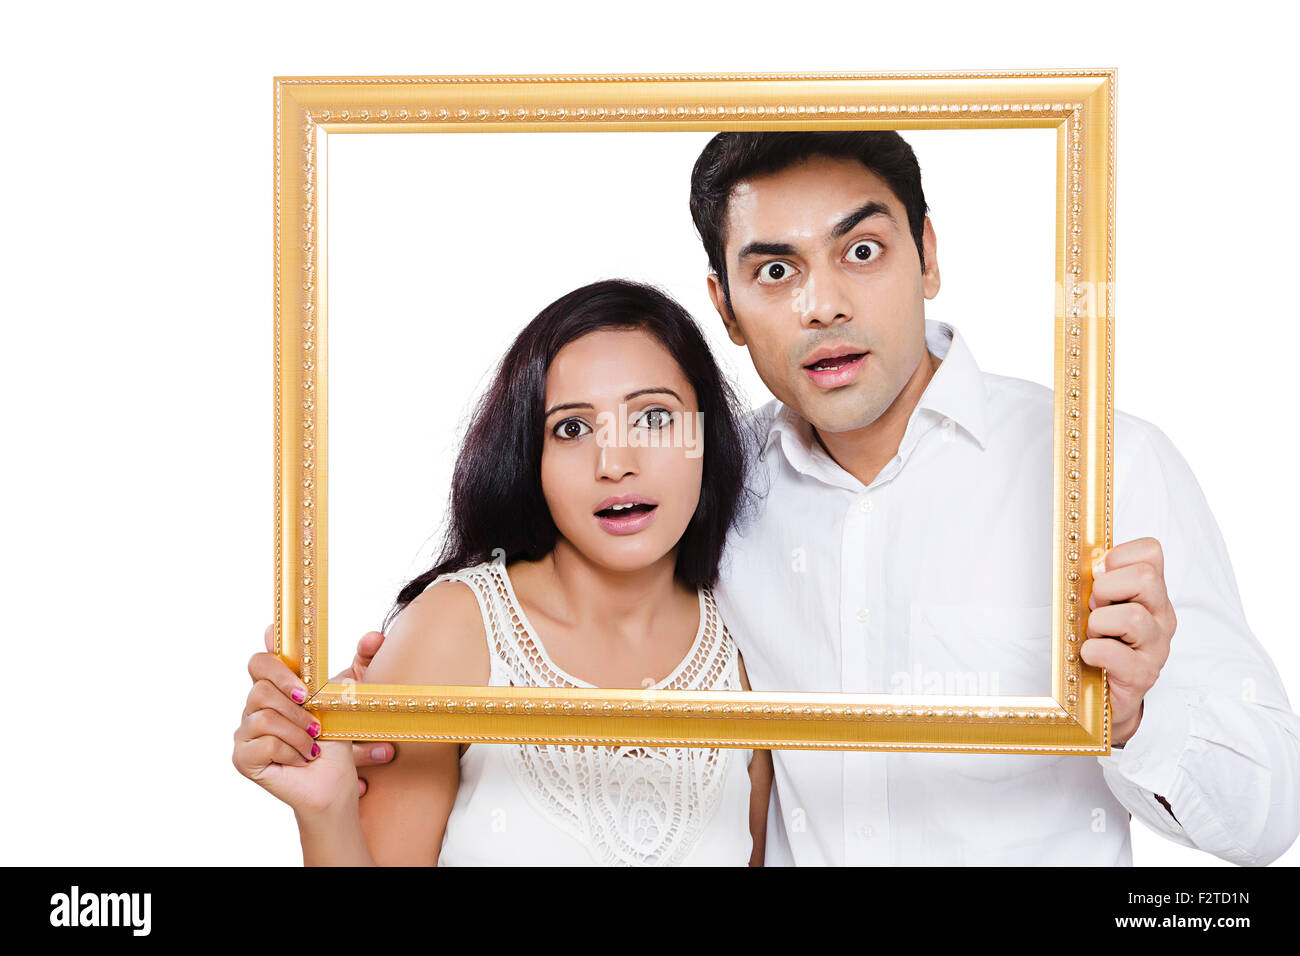 2 indian Married Couple Frame showing Stock Photo